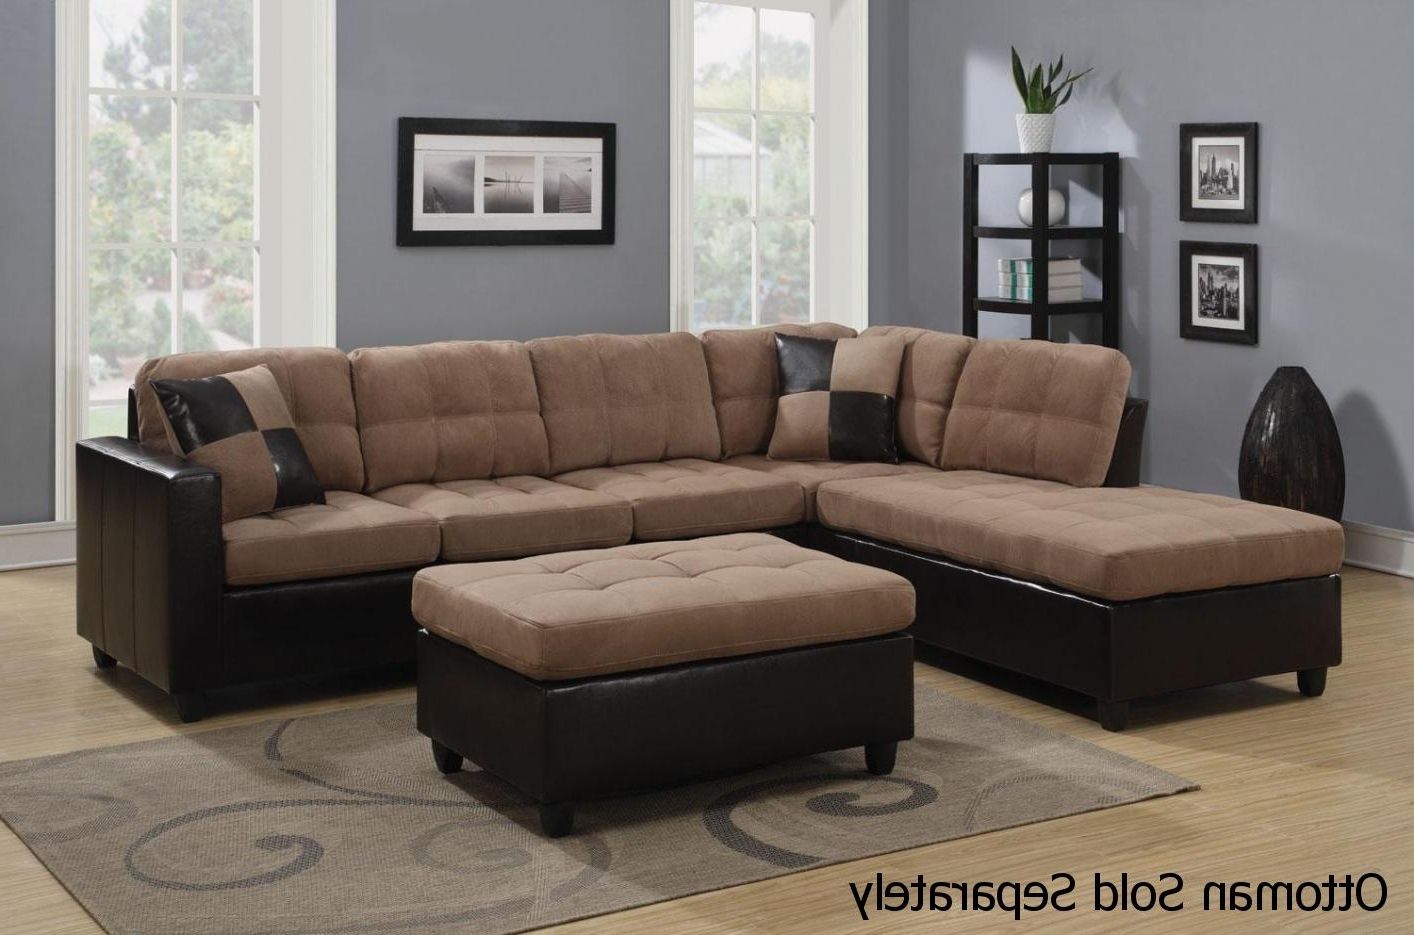 2019 Beige Sectional Sofas Inside Mallory Beige Leather Sectional Sofa – Steal A Sofa Furniture (View 1 of 20)